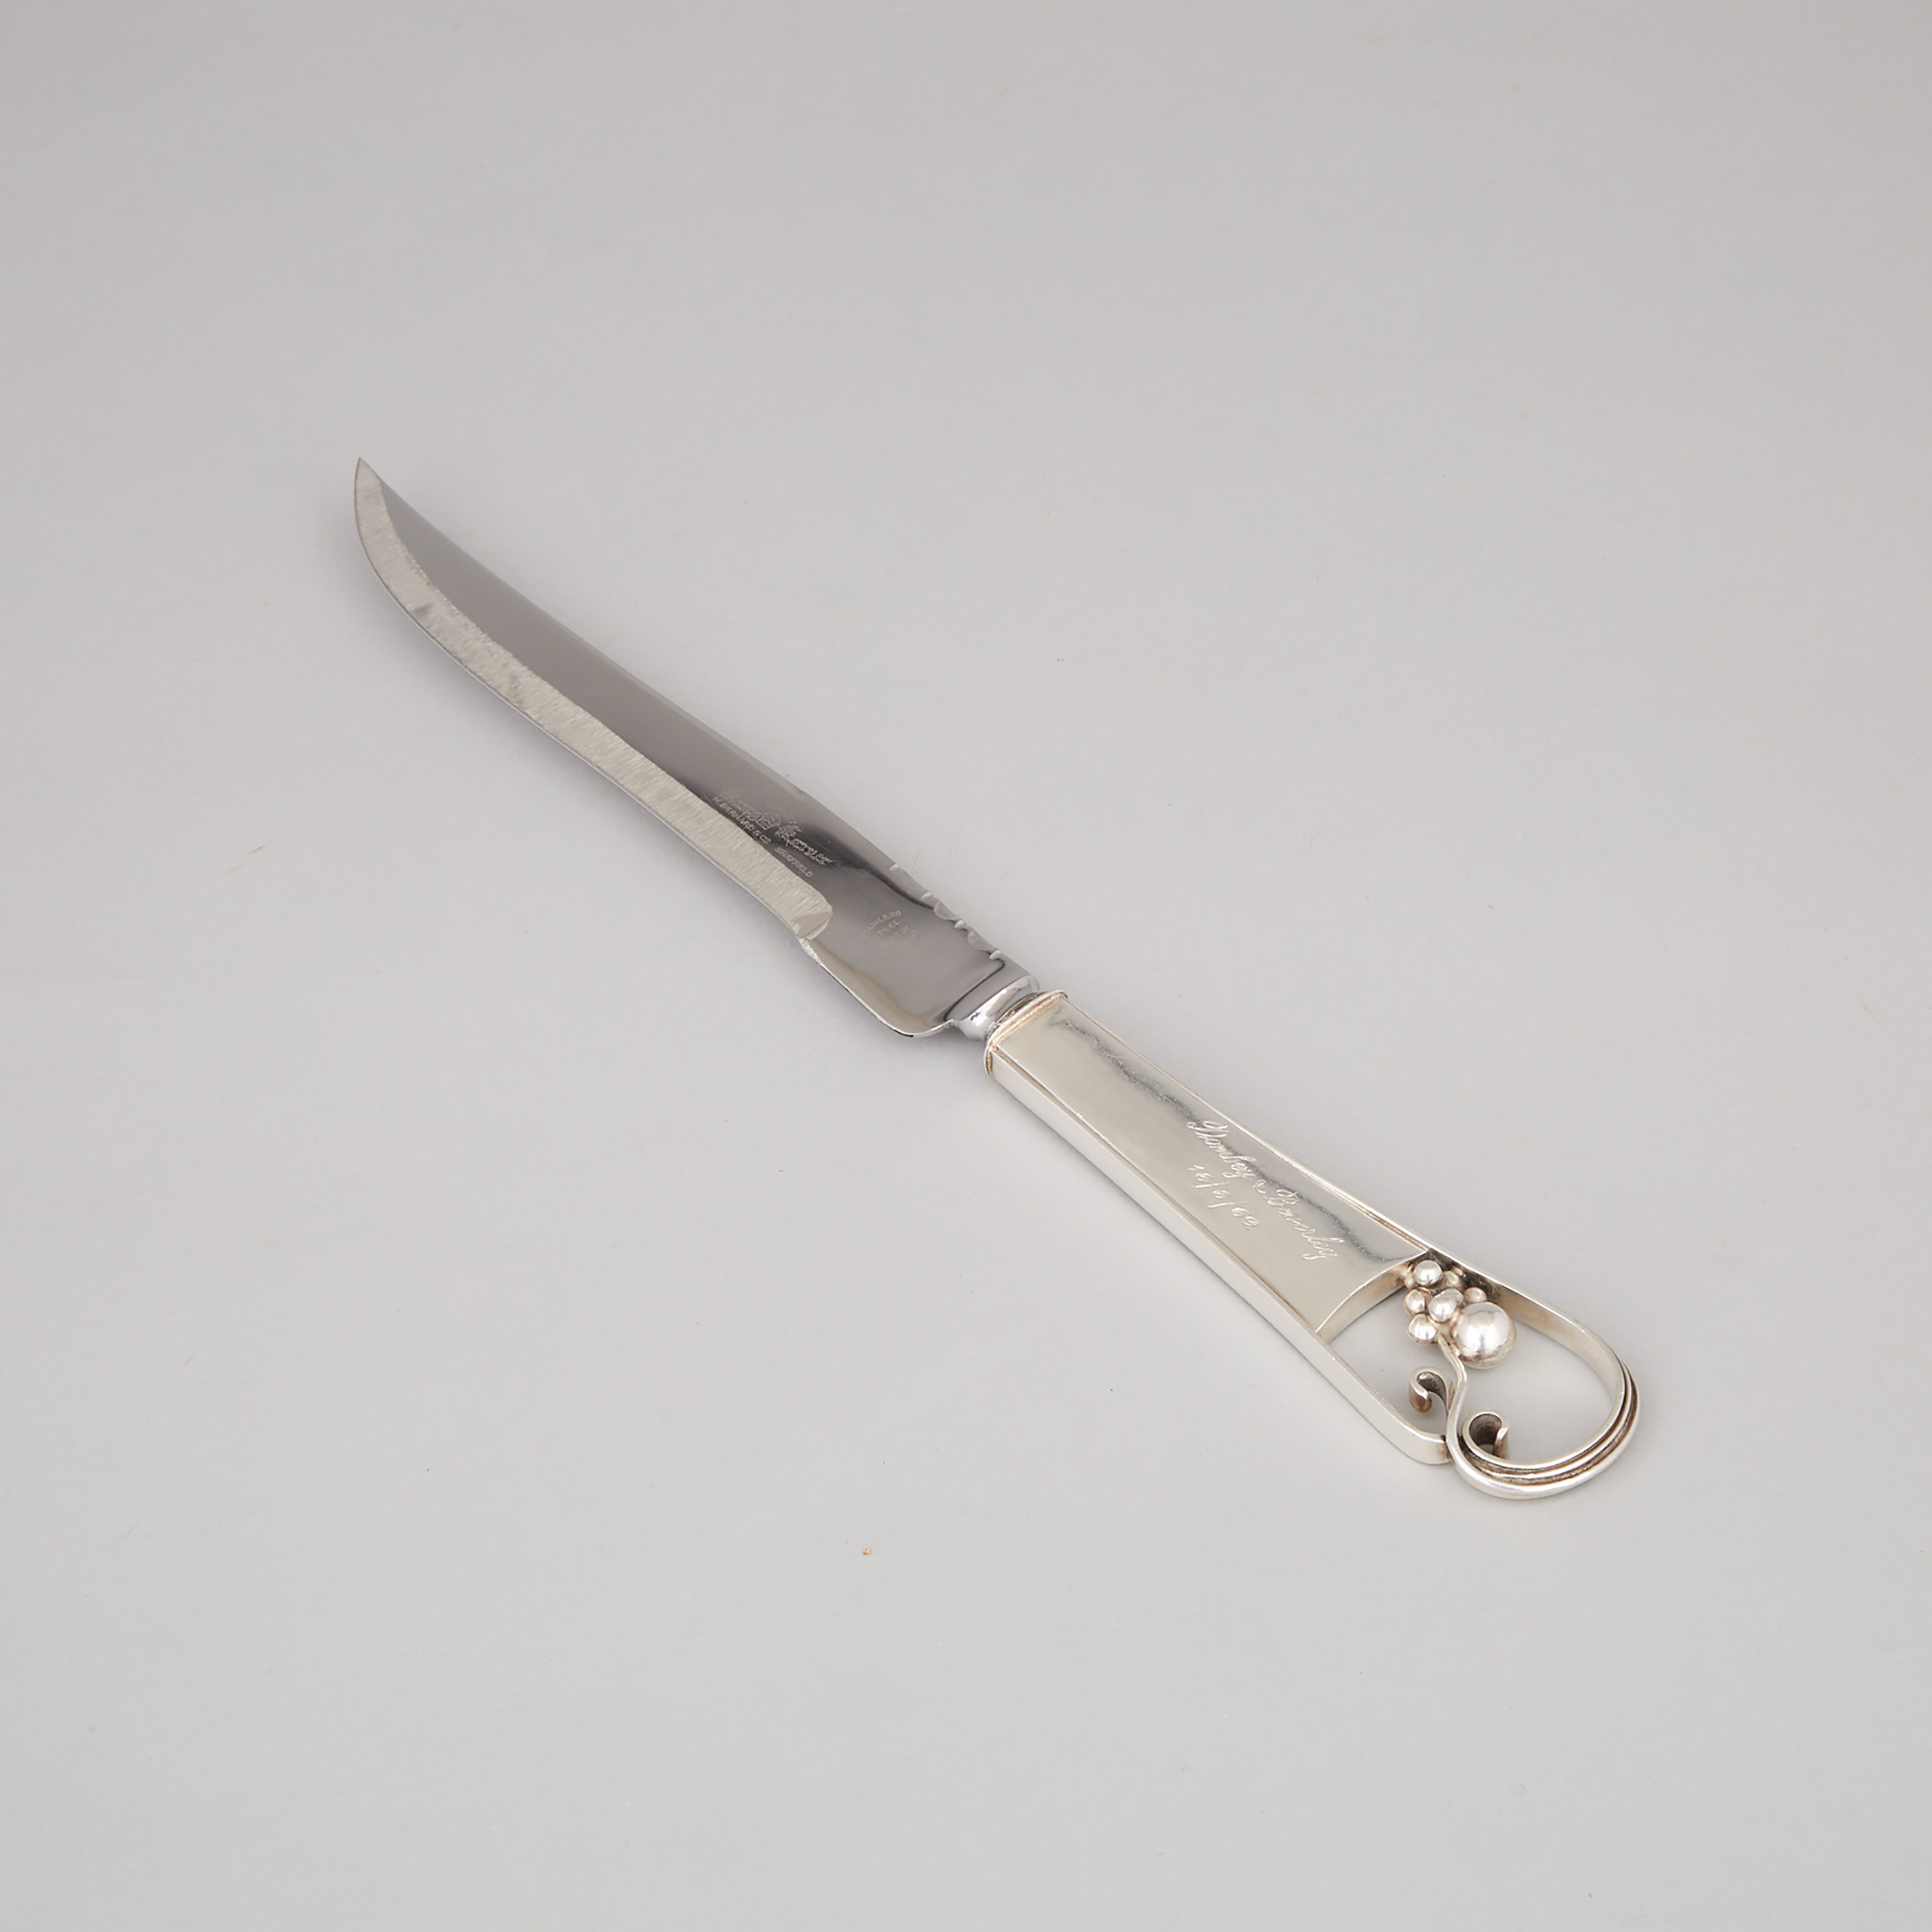 Canadian Silver Carving Knife, Carl Poul Petersen, Montreal, Que., c.1962